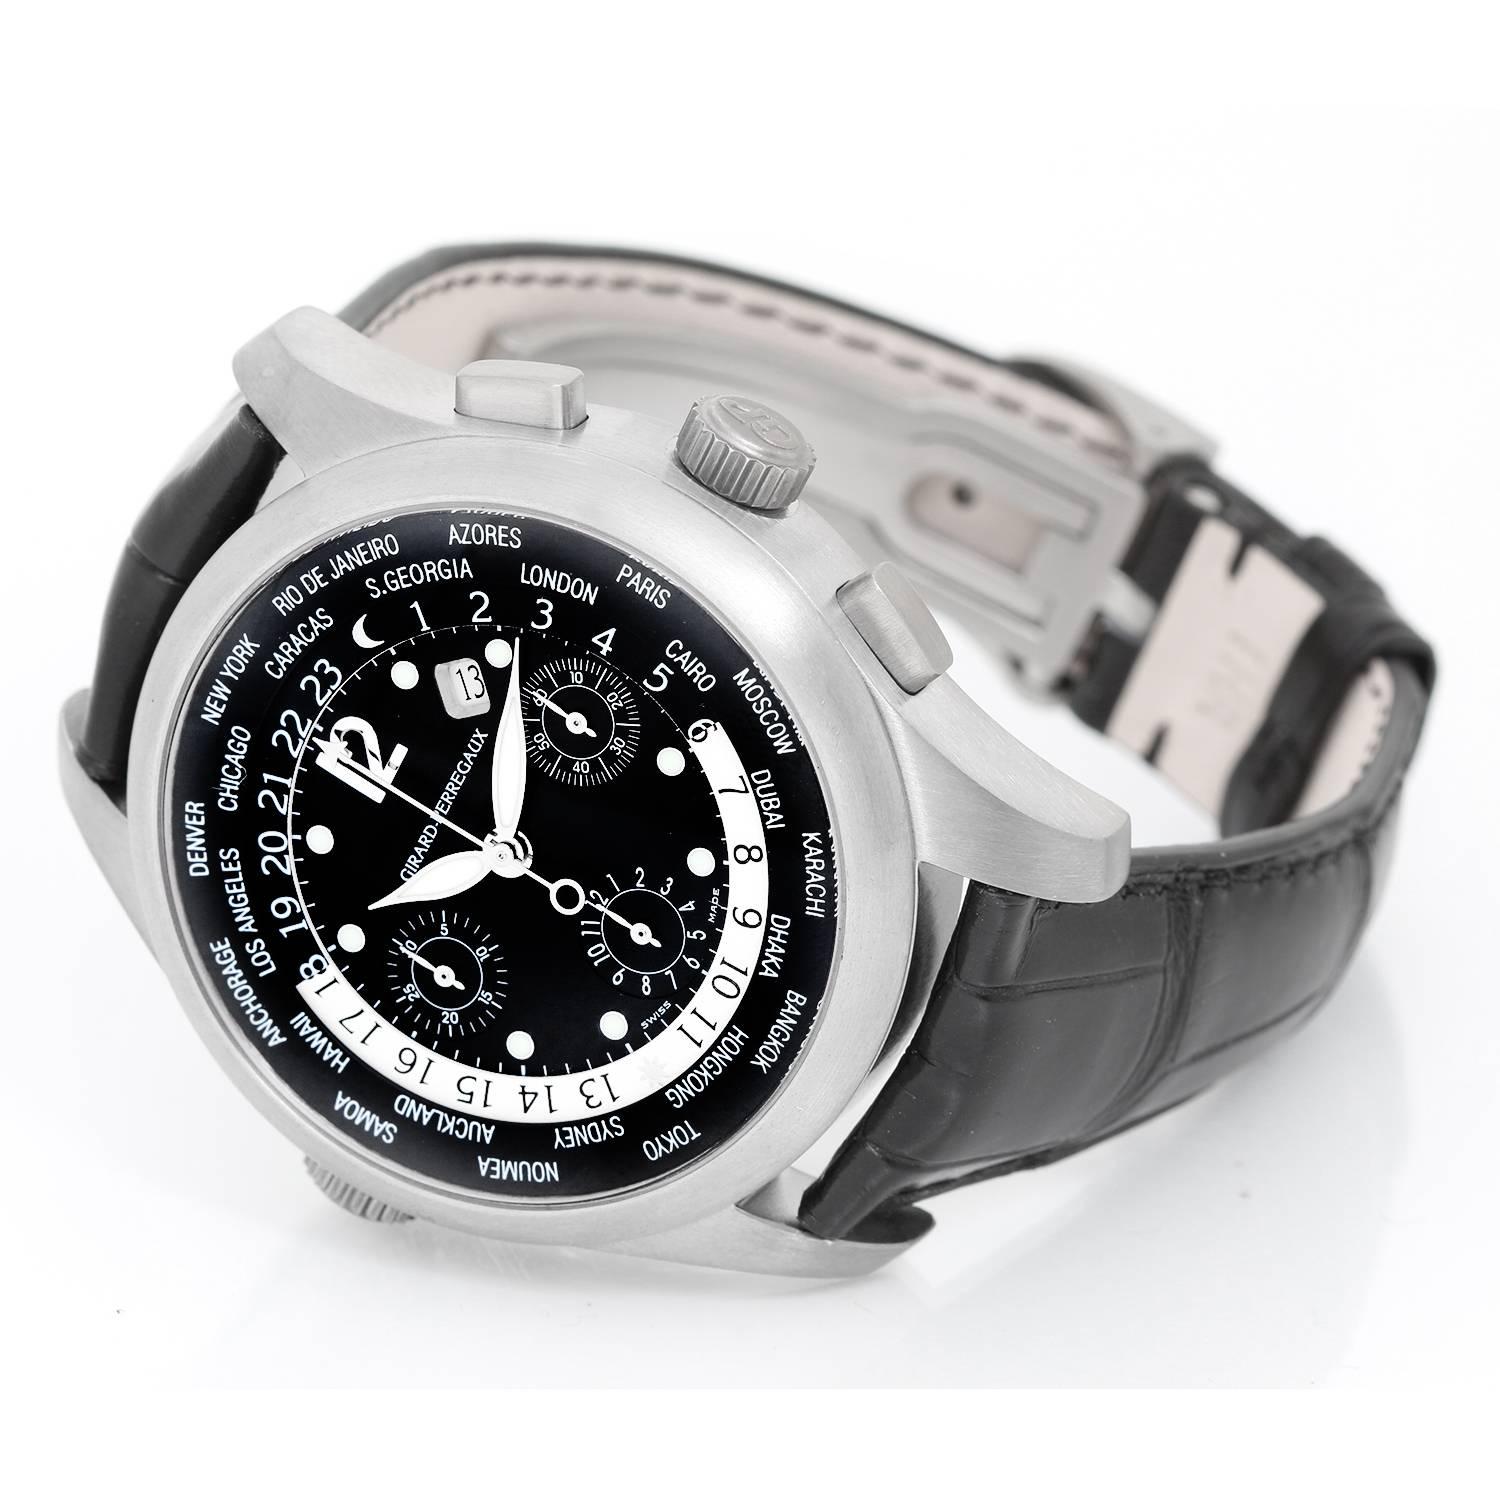 Girard-Perregaux World Time Titanium Ref 49800 -  Automatic ; Water Resistant 50m. Titanium case ( 43 mm ). Black dial with luminous hour markers; Hours - Minutes - Seconds - Date - Chronograph - World Time Display - Exhibition Case Back. Black